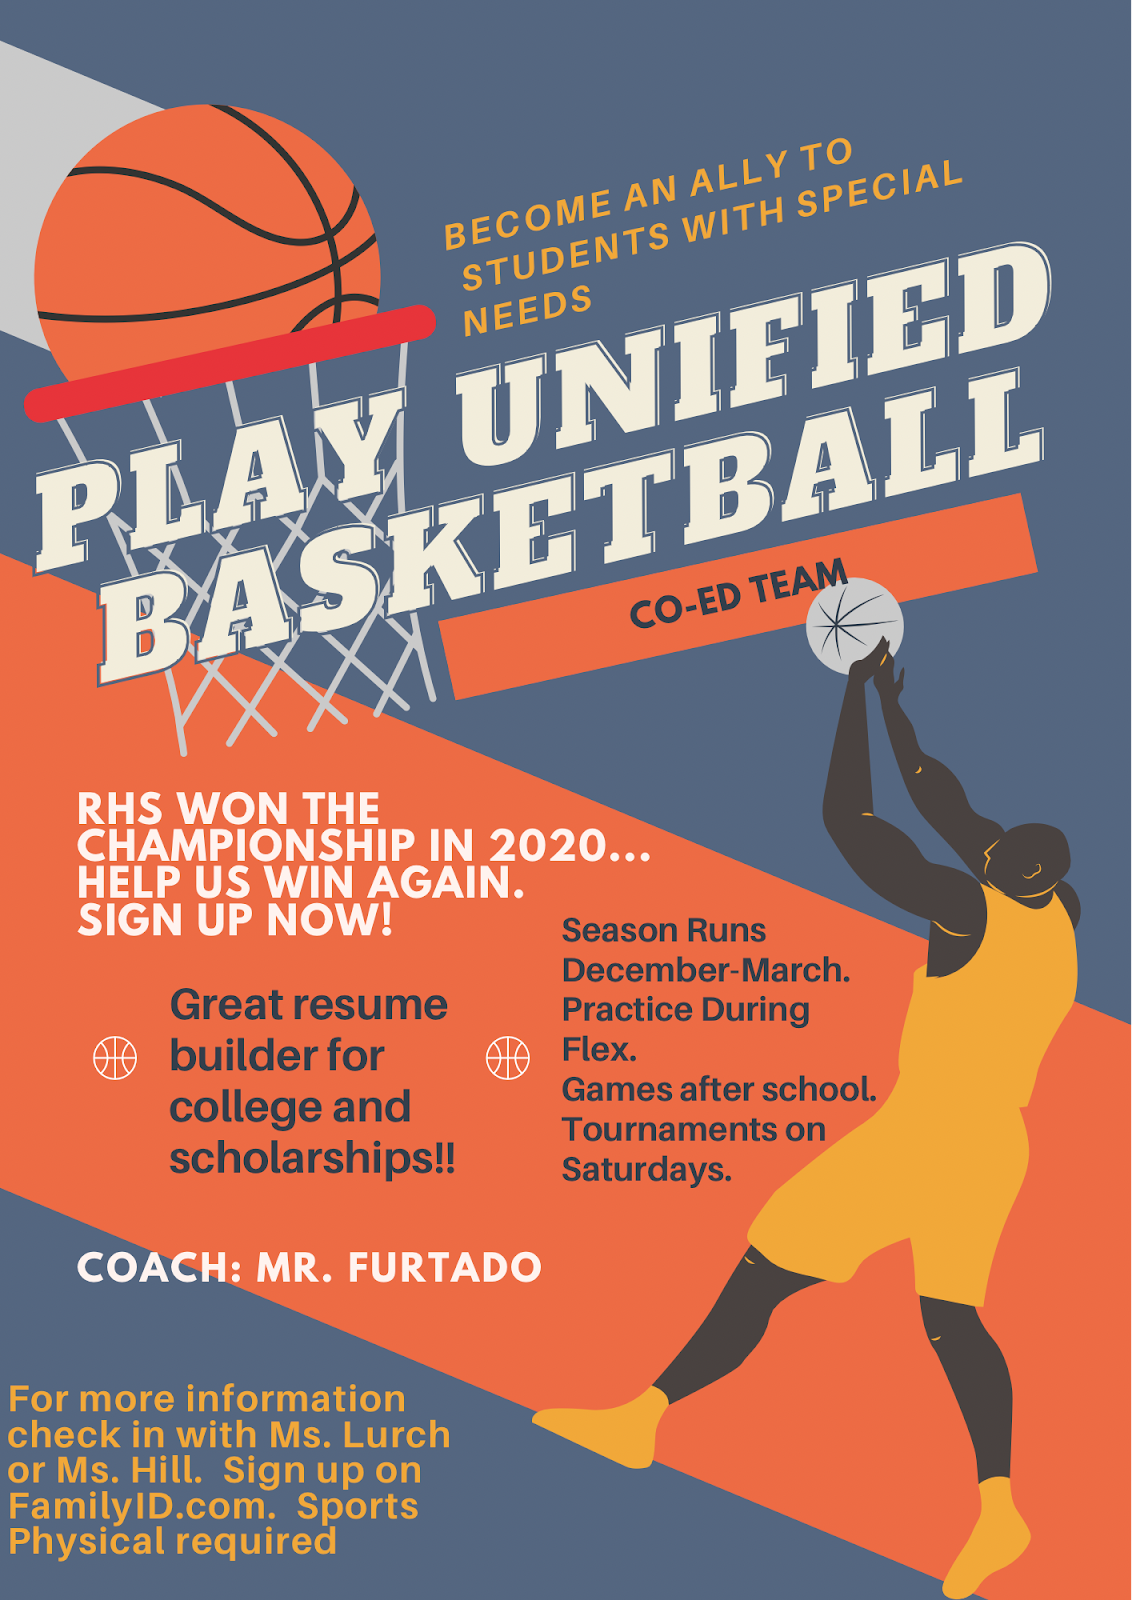 RHS Unified Basketball. Get signed up today for this co-ed basketball team. RHS won the championship in 2020...help us win again. Sign up now!